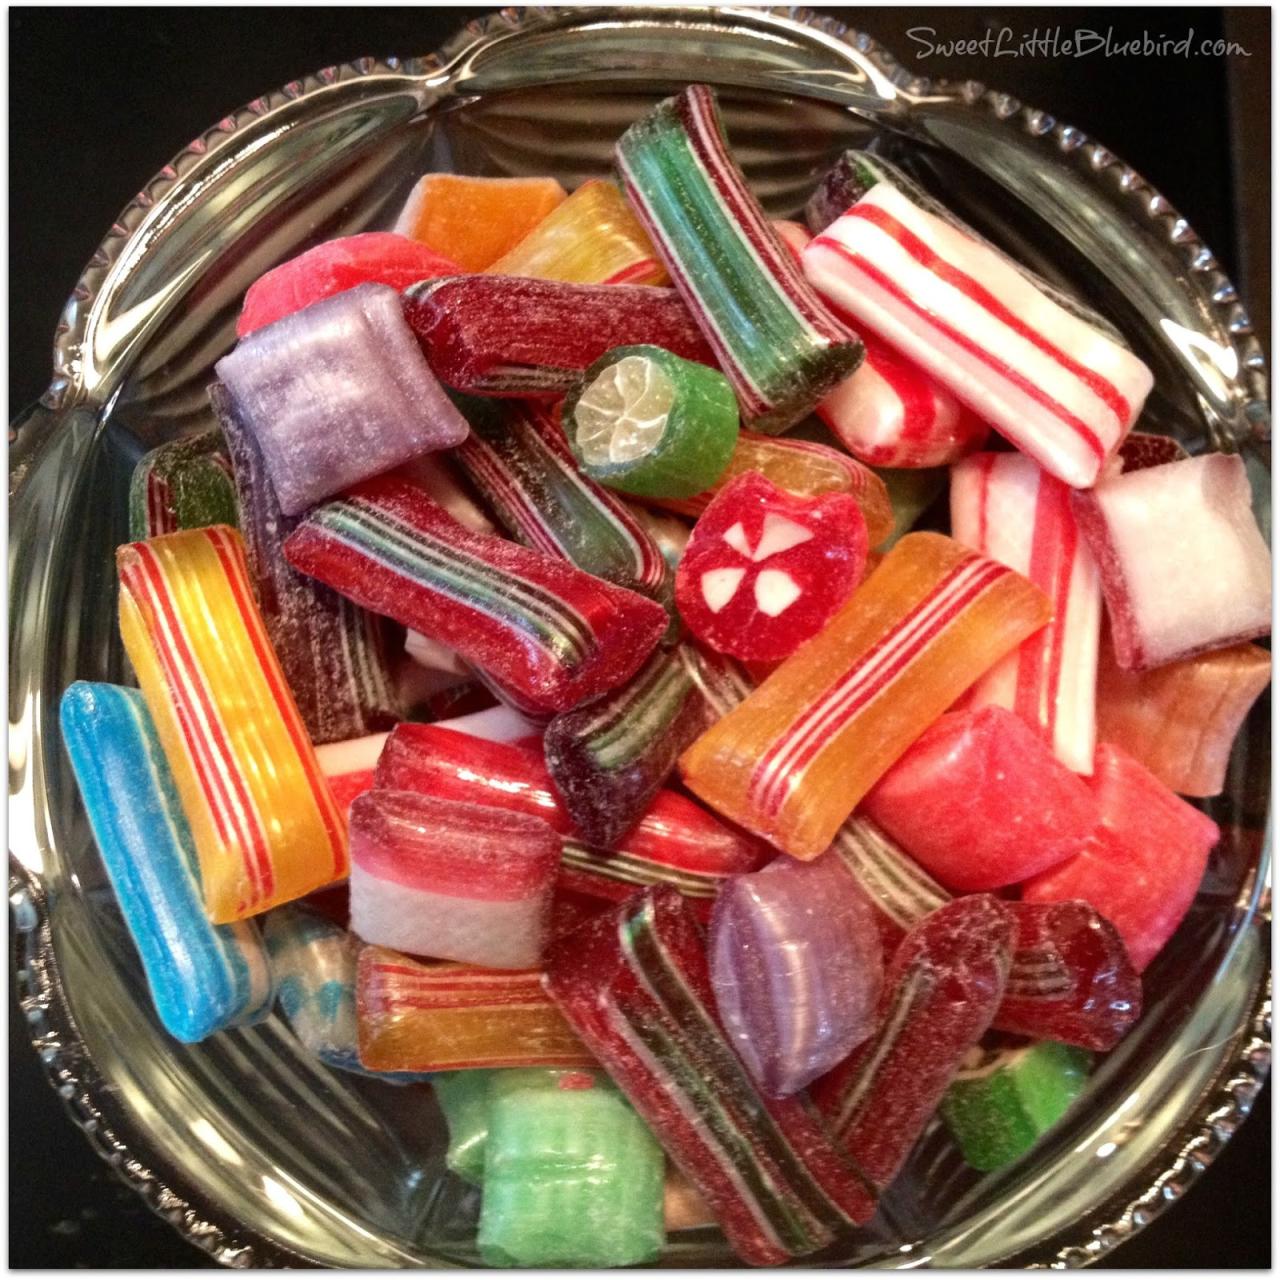 Old fashioned hard candies